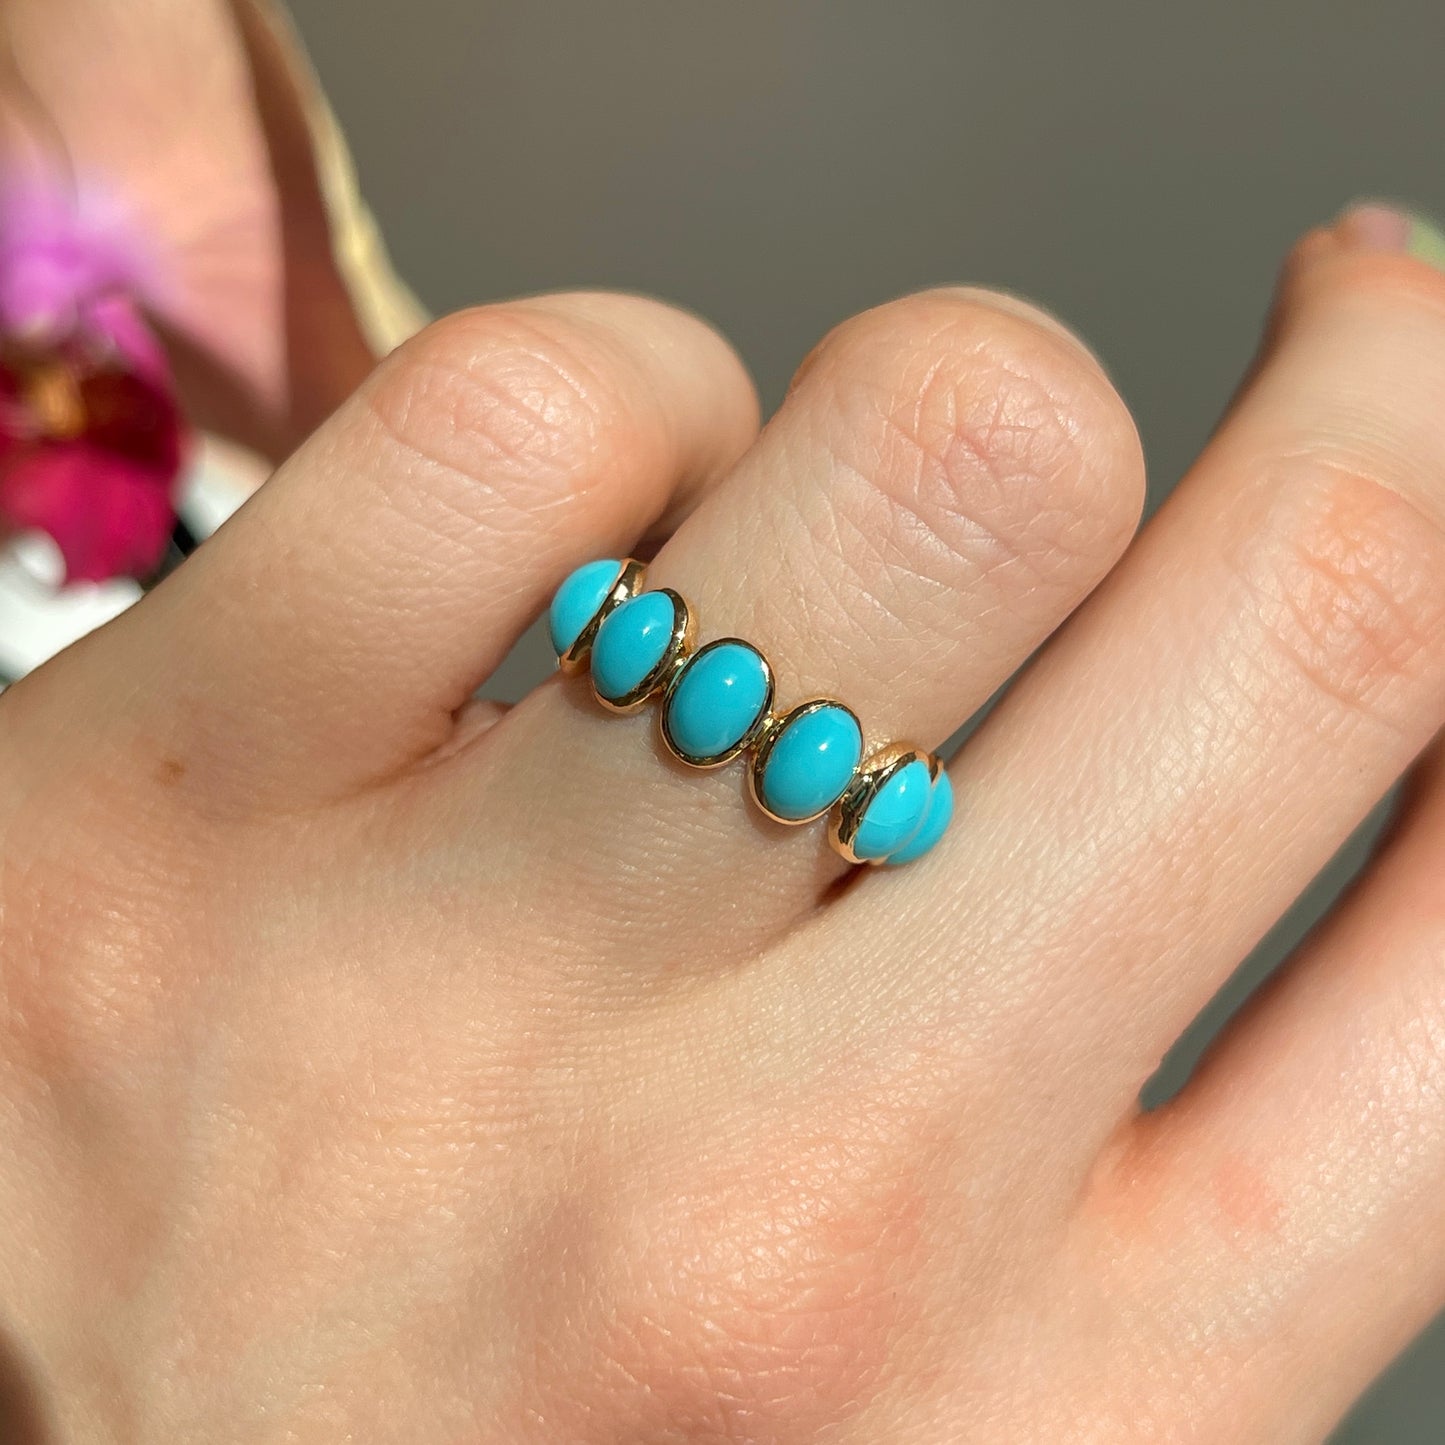 18KT Yellow Gold Bezel Oval Turquoise Eternity Band Ring